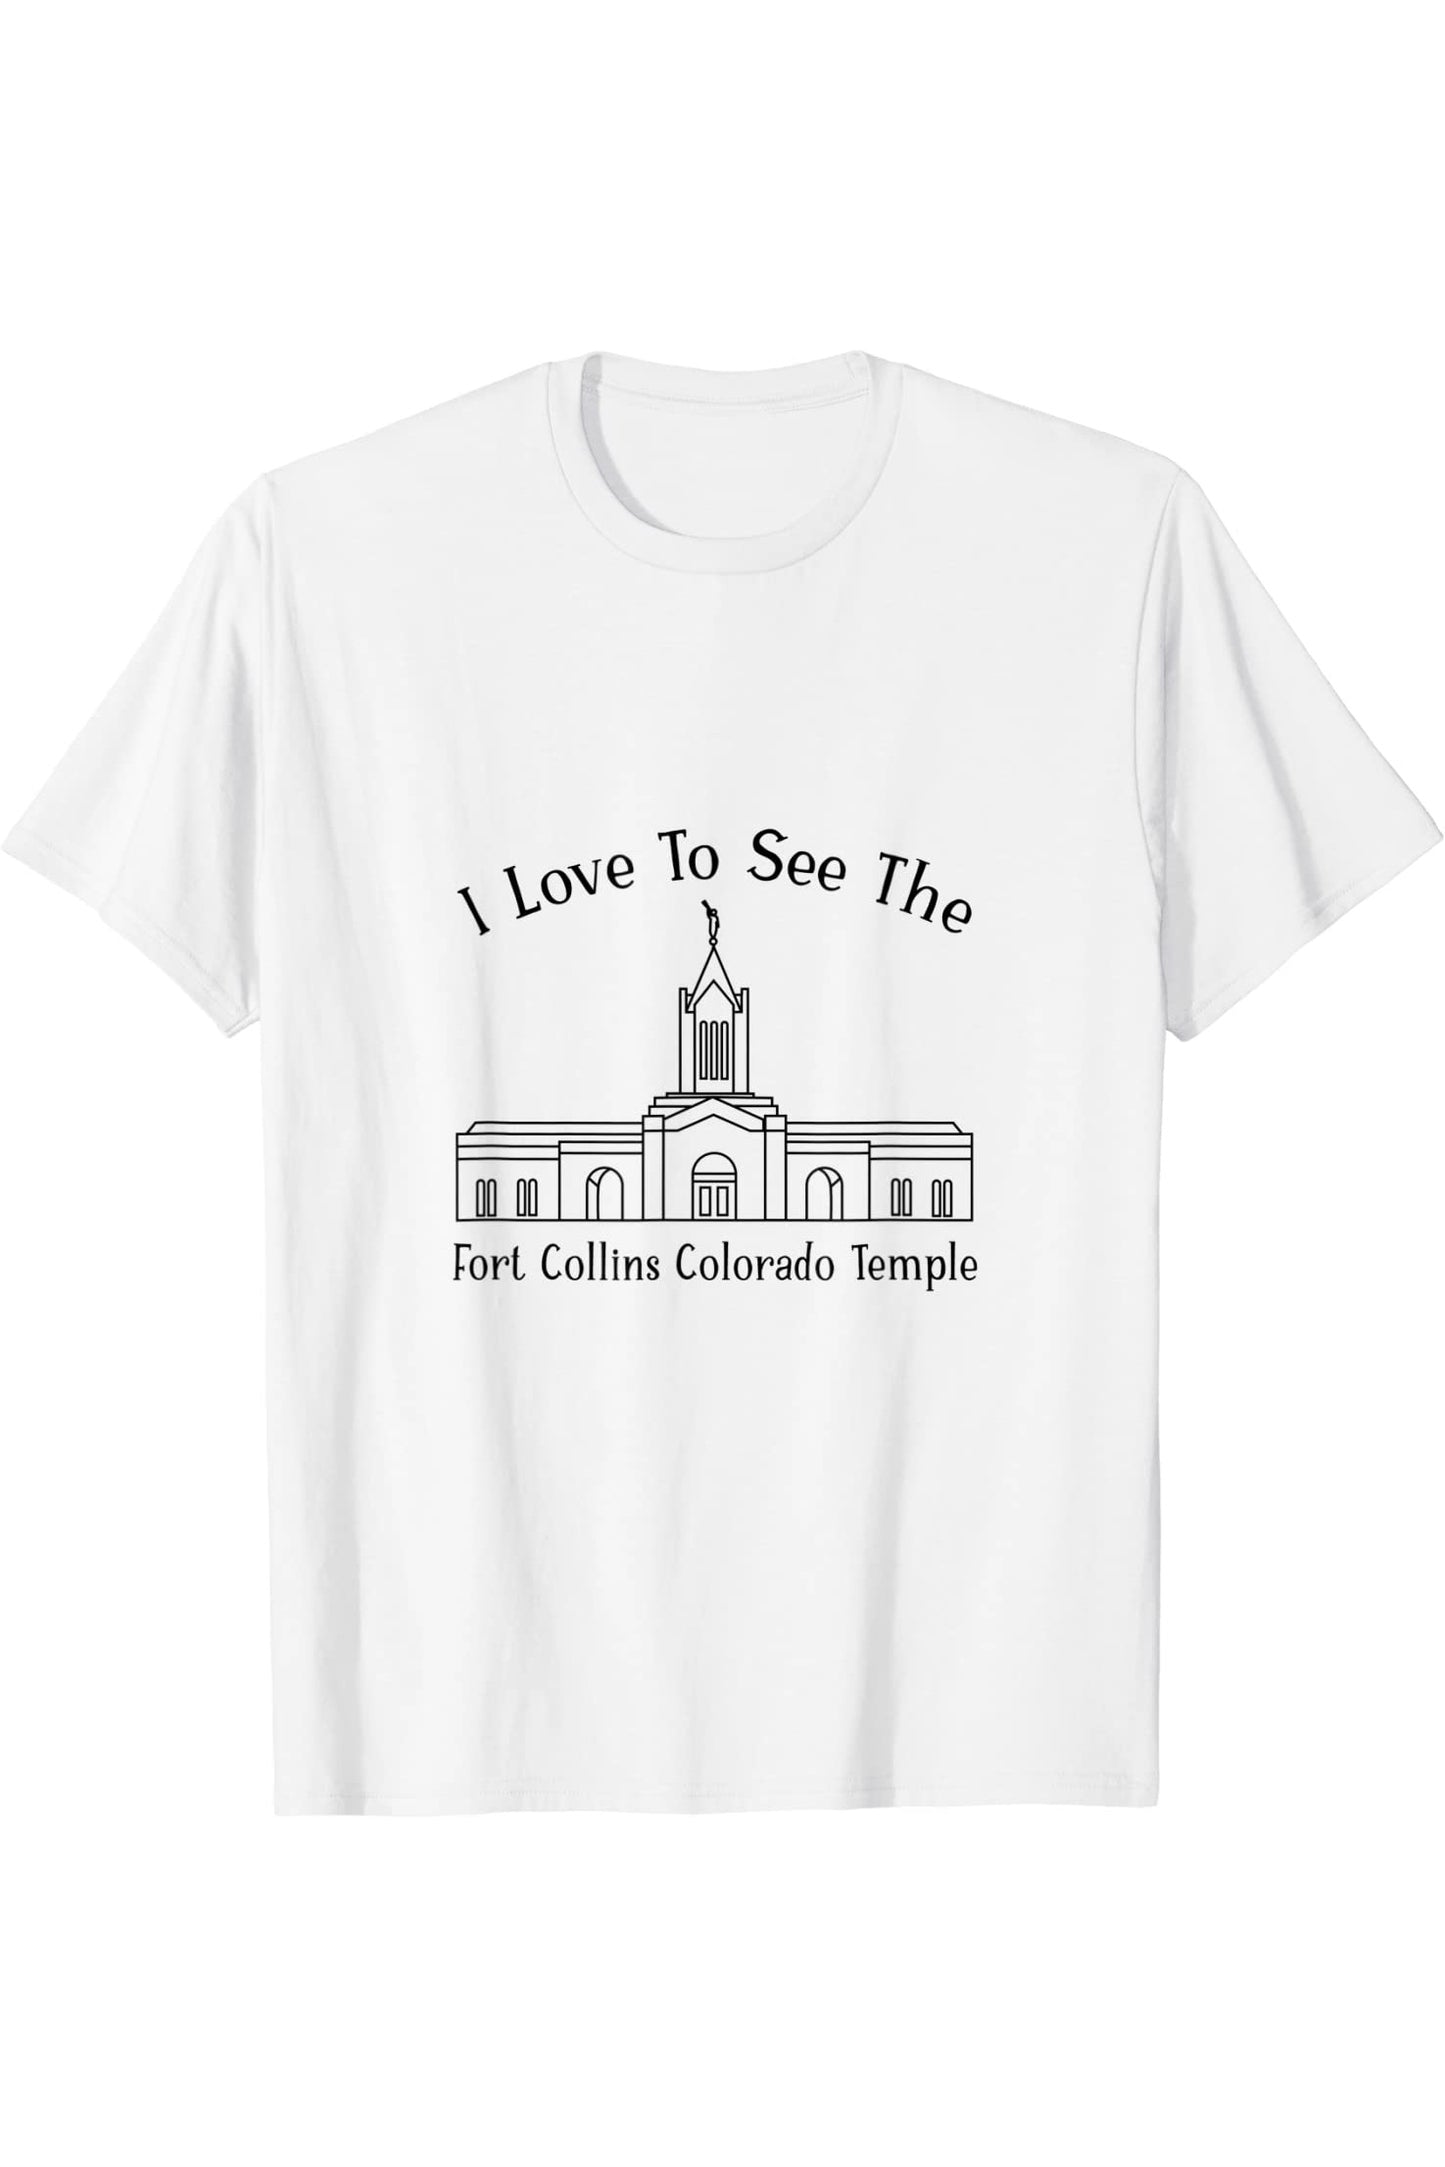 Fort Collins Colorado Temple T-Shirt - Happy Style (English) US